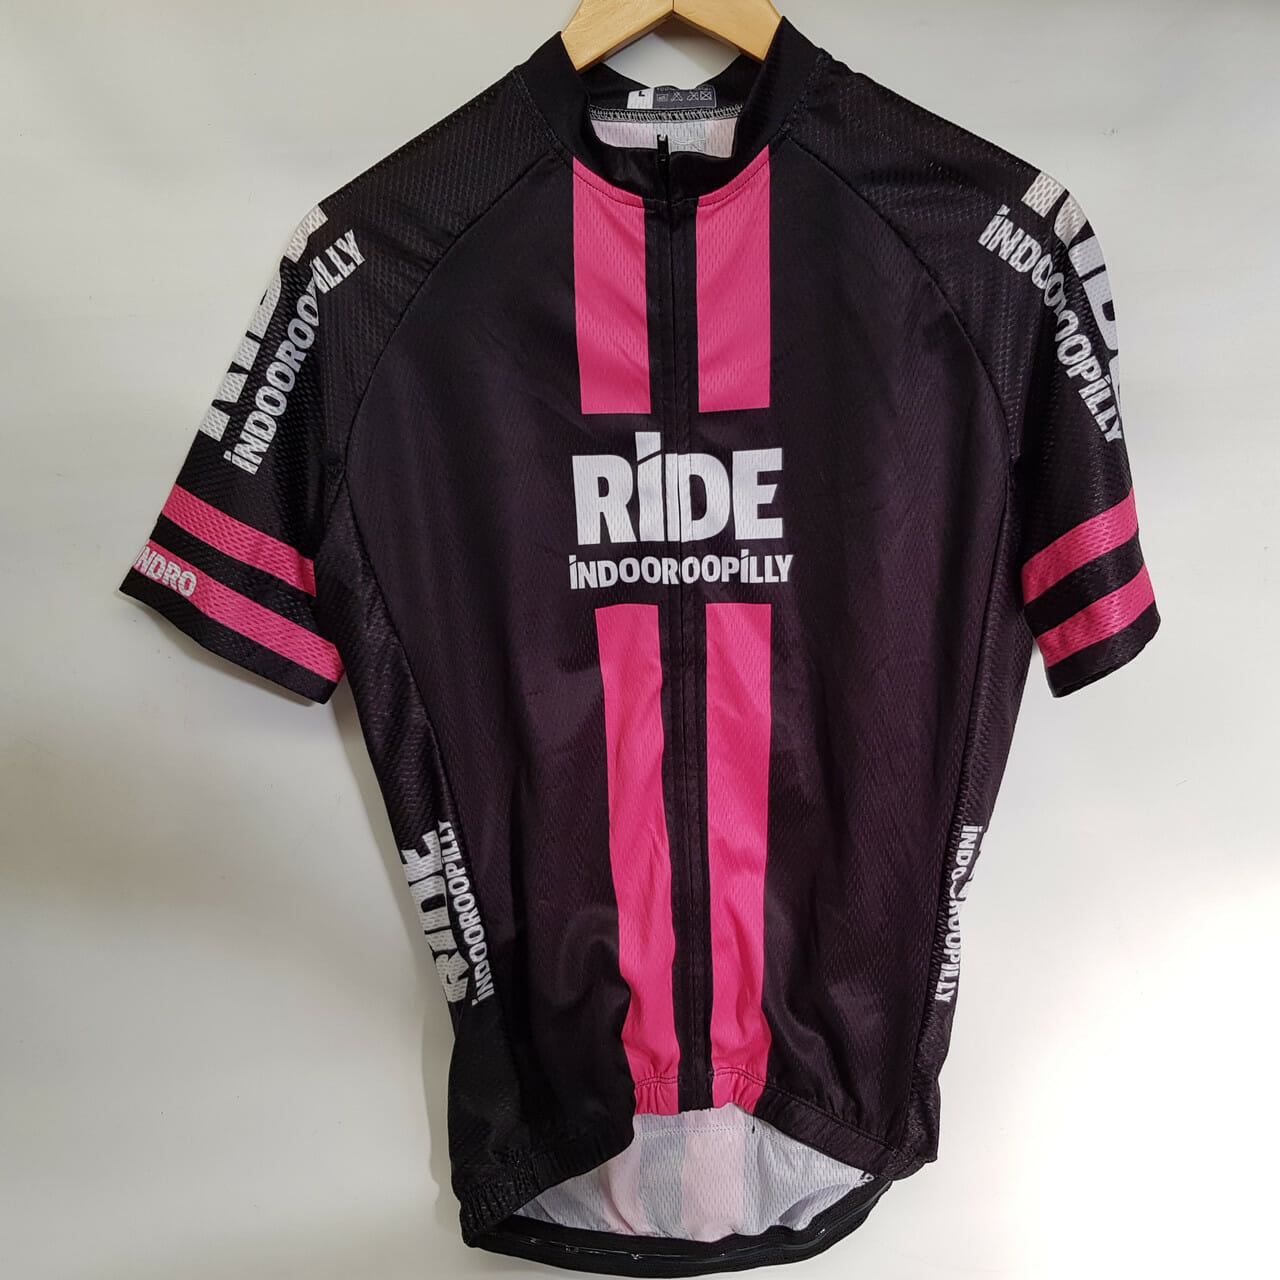 RIDE INDOOROOPILLY JERSEY PINK SIZE L #48882-1